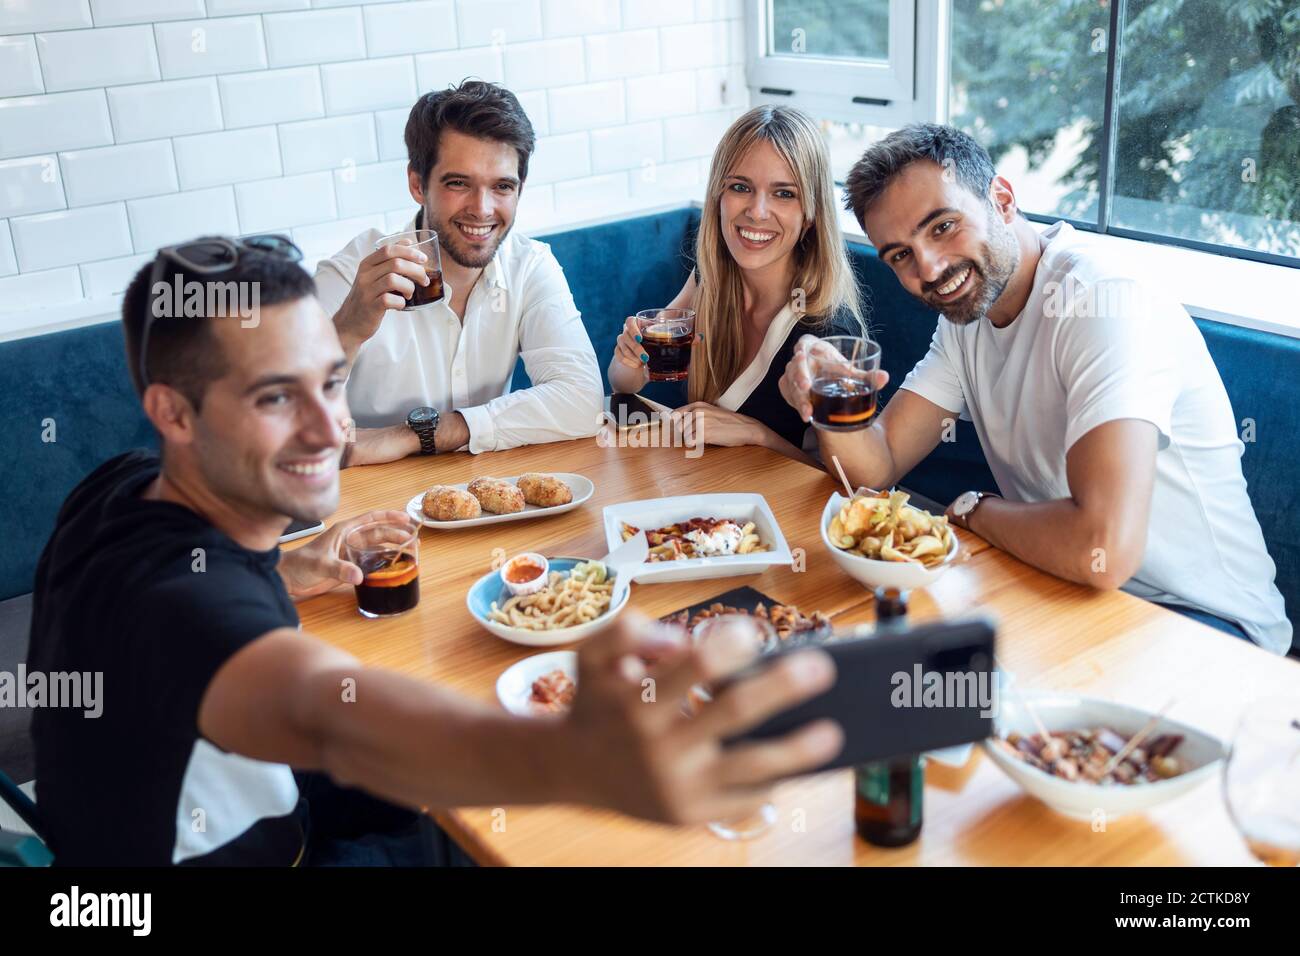 Group of friends taking selfie while having meal at restaurant Stock Photo